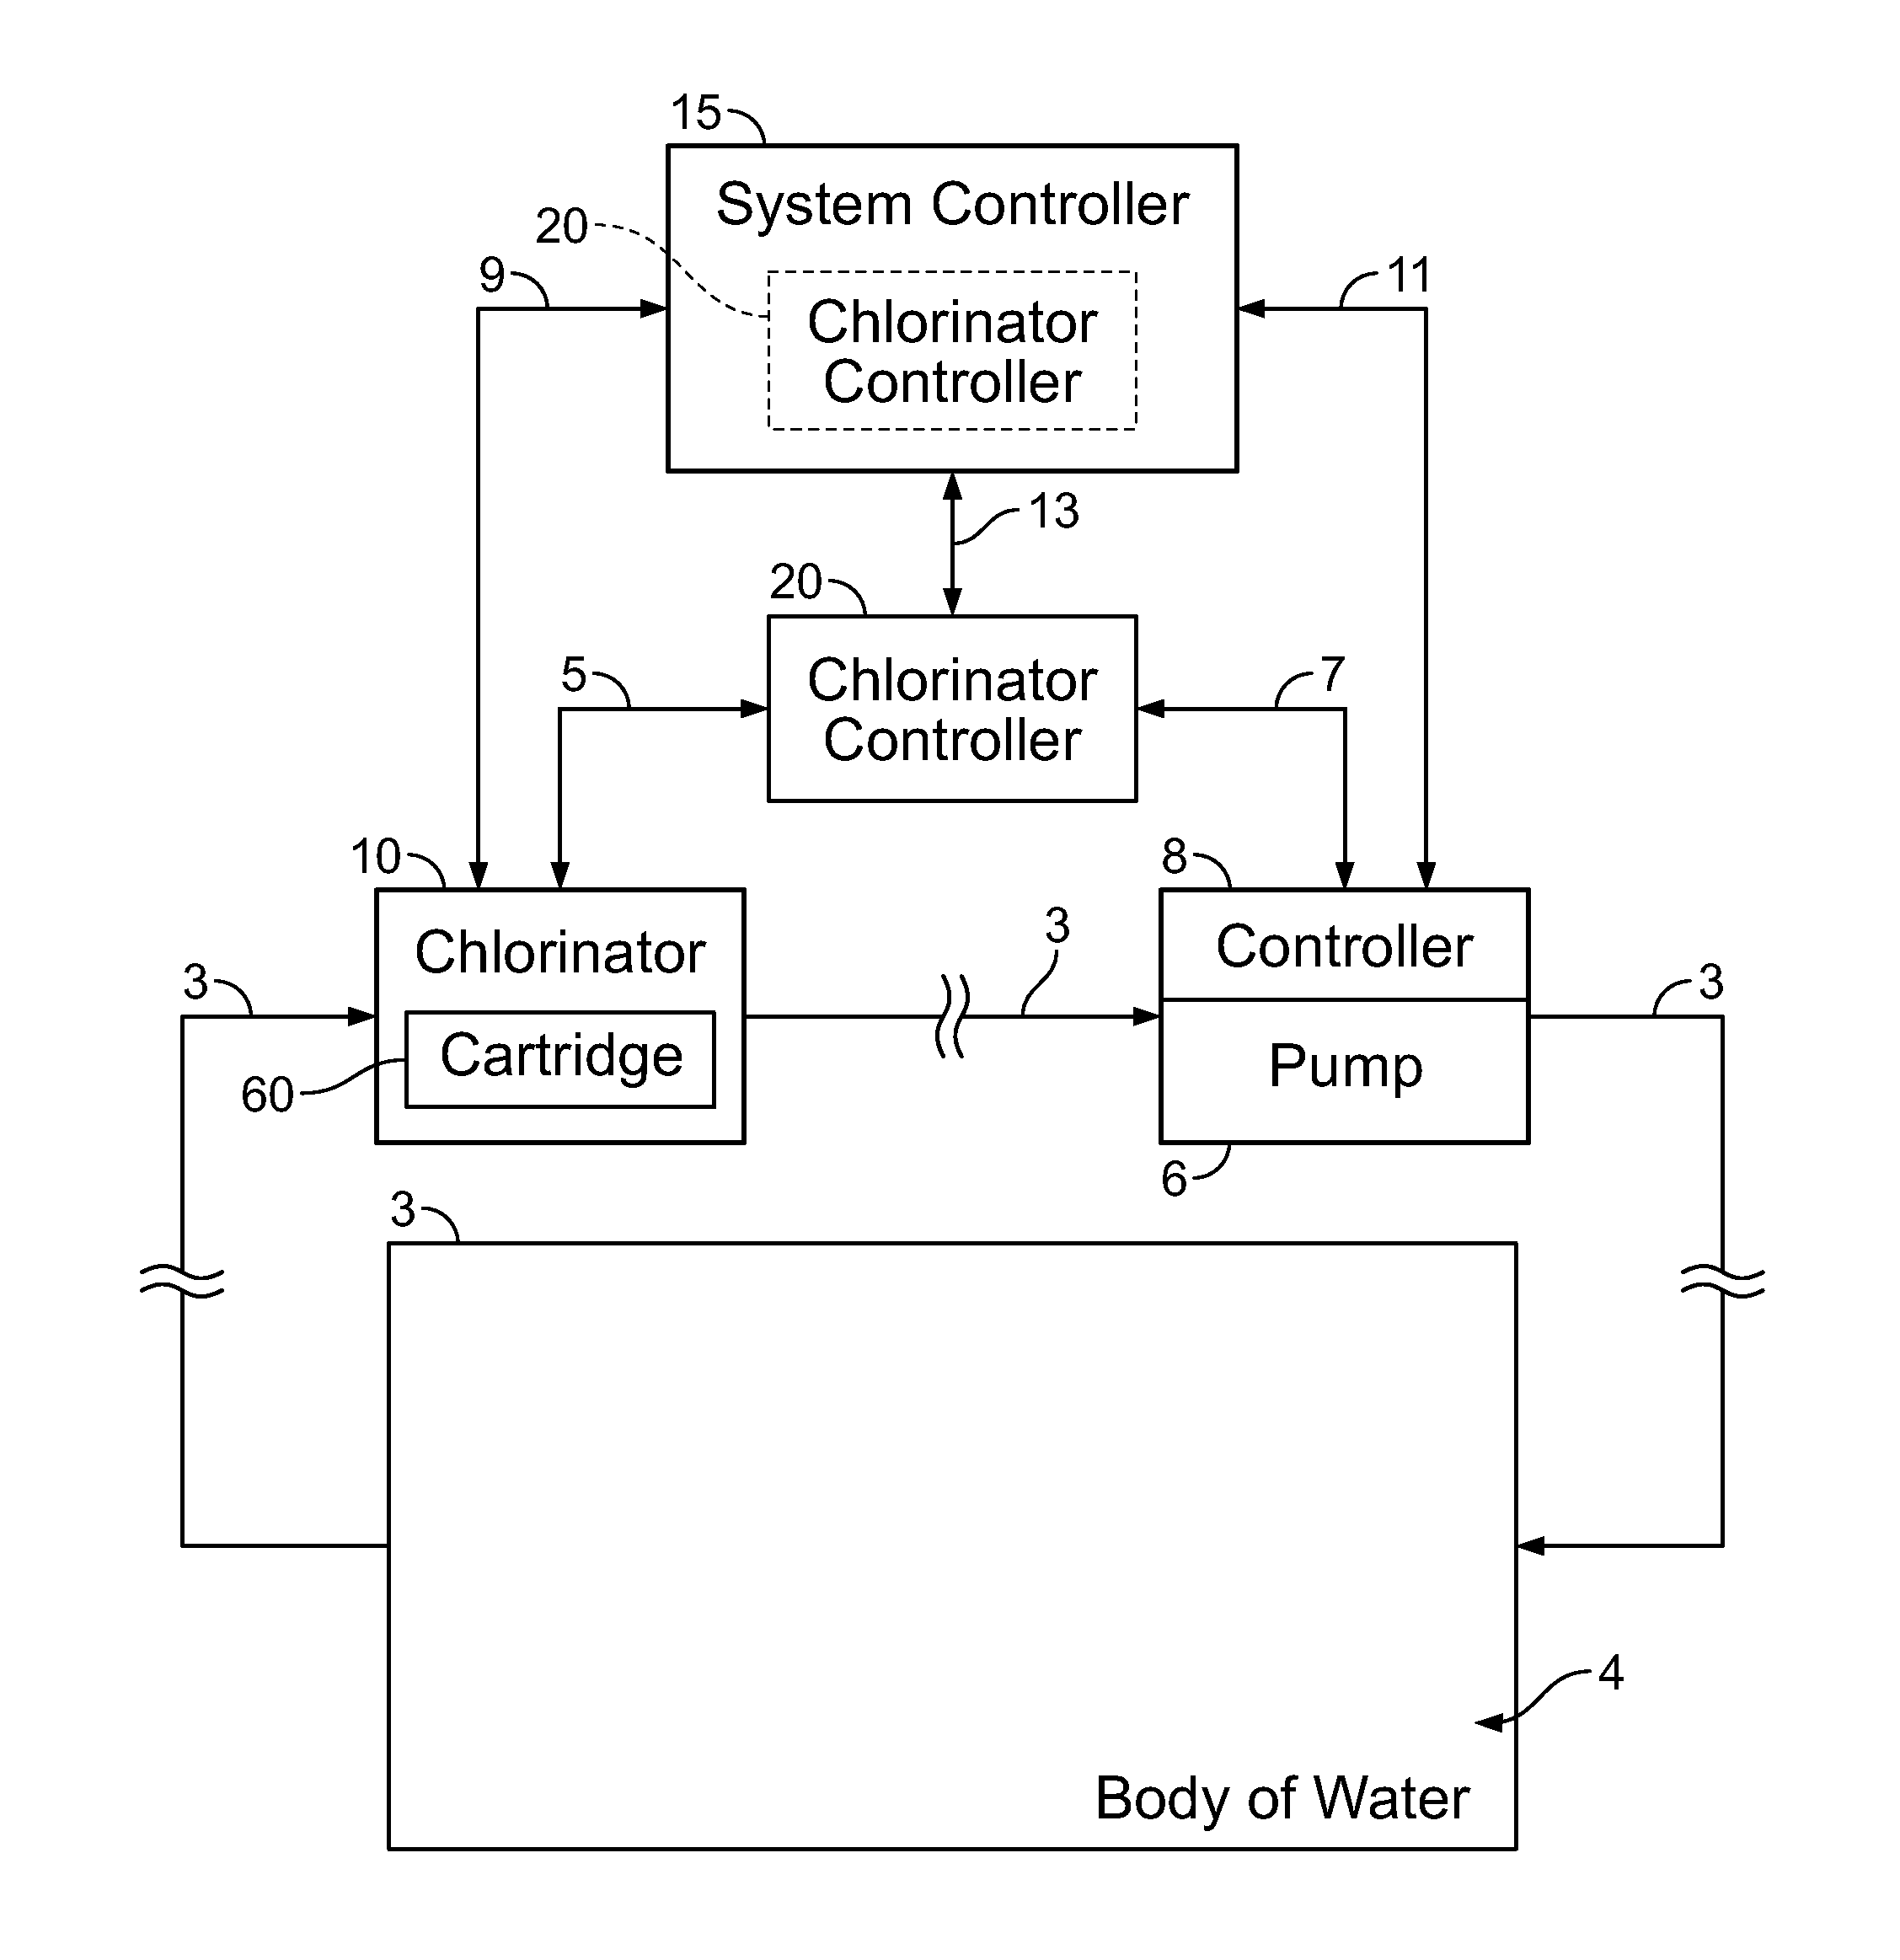 Systems and Methods for Interrelated Control of Chlorinators and Pumps